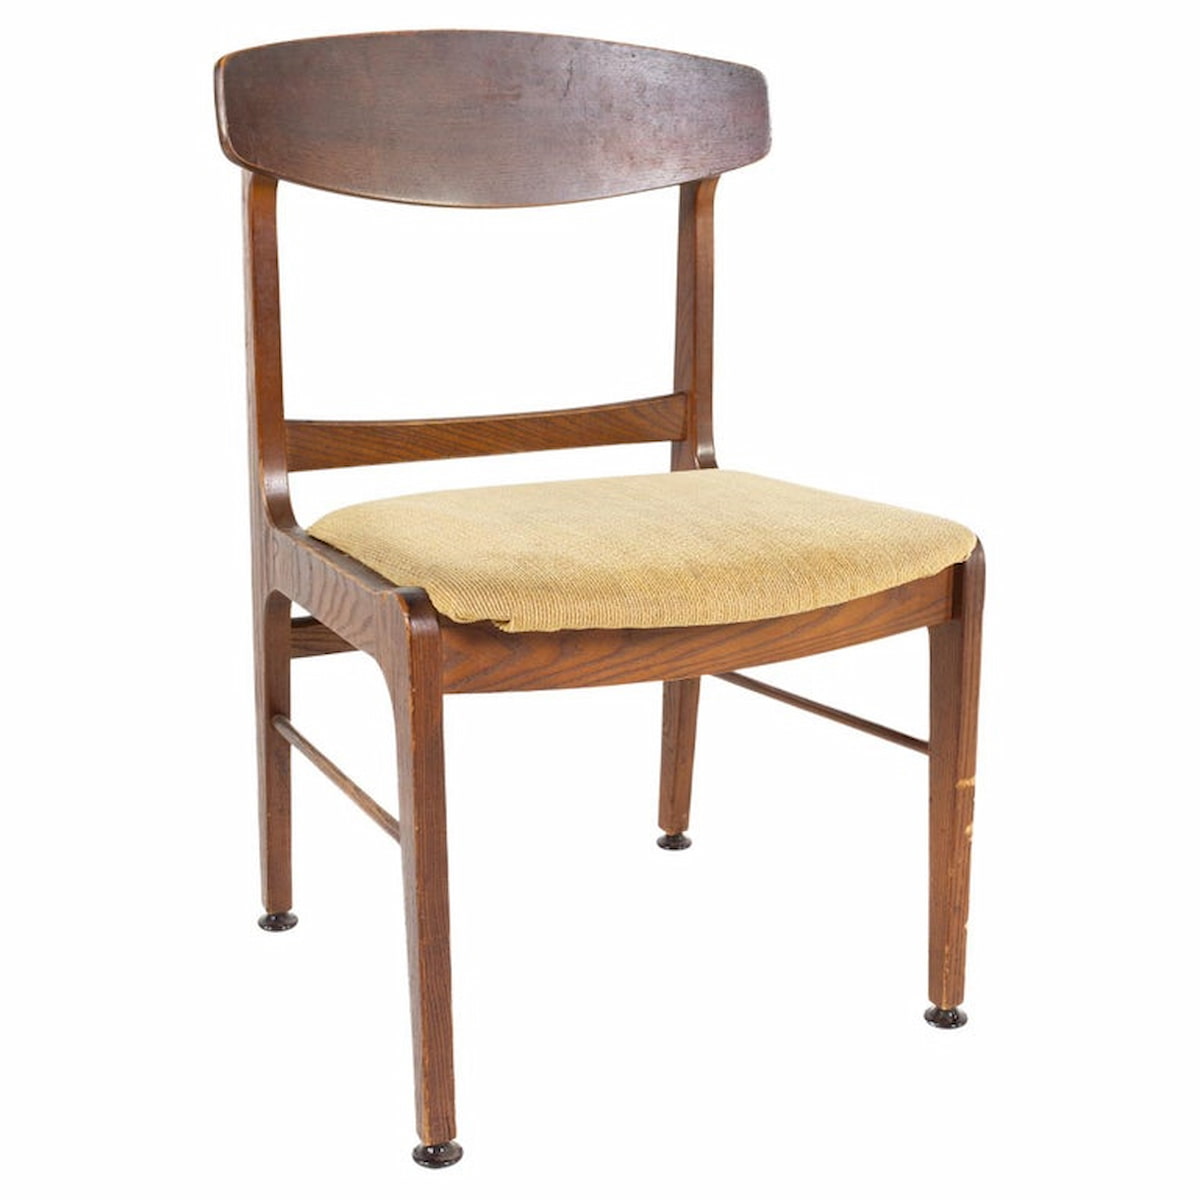 https://midcenturywarehouse.com/wp-content/uploads/2022/03/Stanley-Mid-Century-Walnut-Dining-Side-Chair-cover.jpg